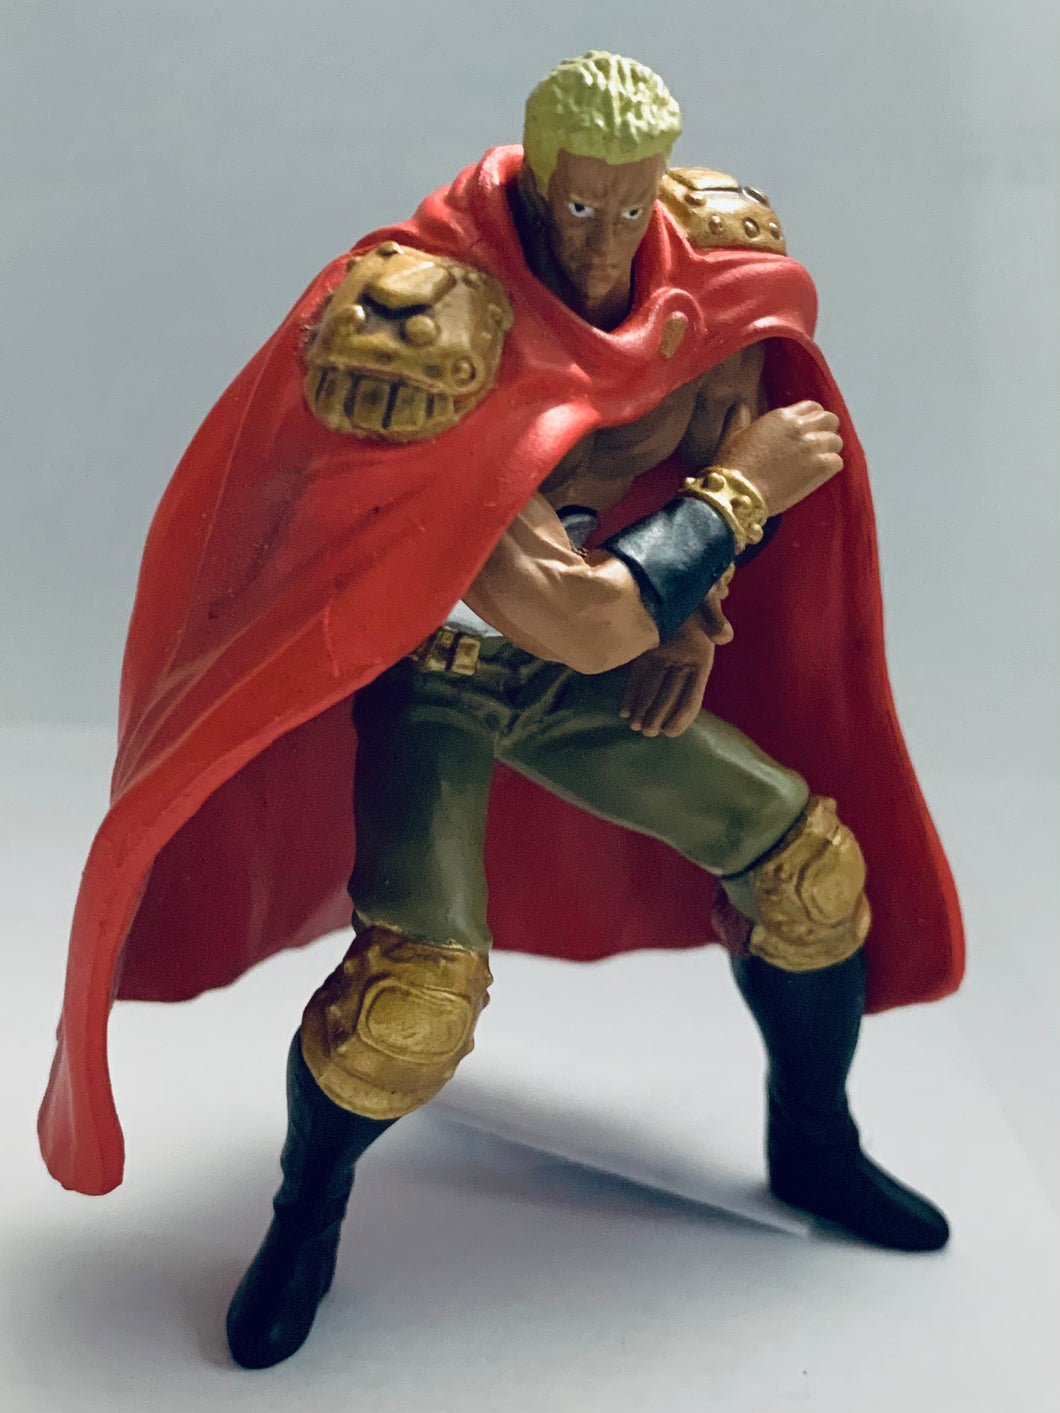 Hokuto no Ken - Raoh - HG Series Fist of the North Star - The Savior at the End of the Century Appears -